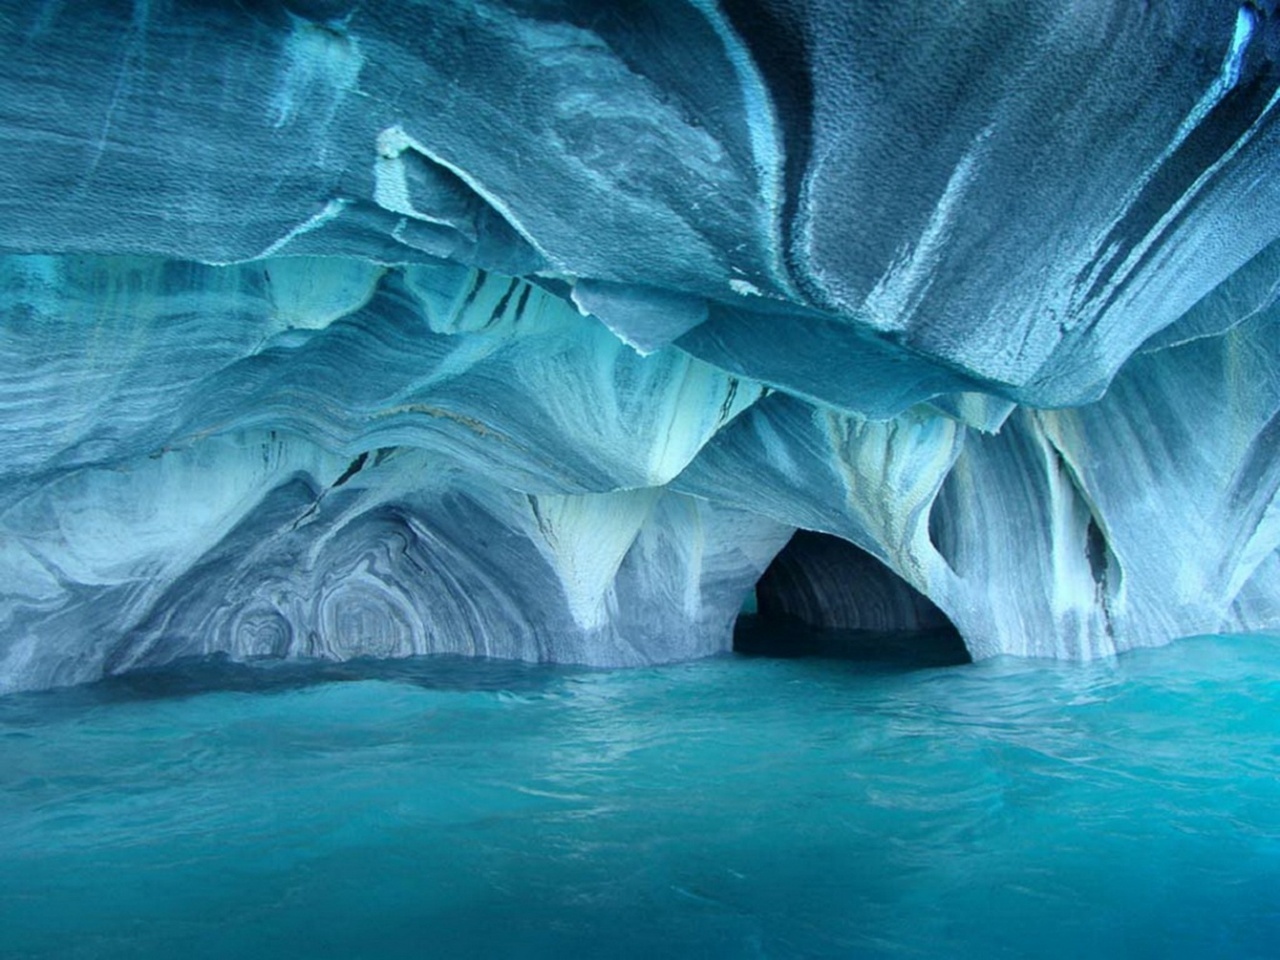 Marble Caves Chile- Crystal-clear water tinted a dazzling blue by glacial silt accentuates the intricate designs in what many call he most amazing cave network in the world. The water is also responsible for forming the unique shape of the caverns and walls, making an Earthly cave appear very otherworldly.